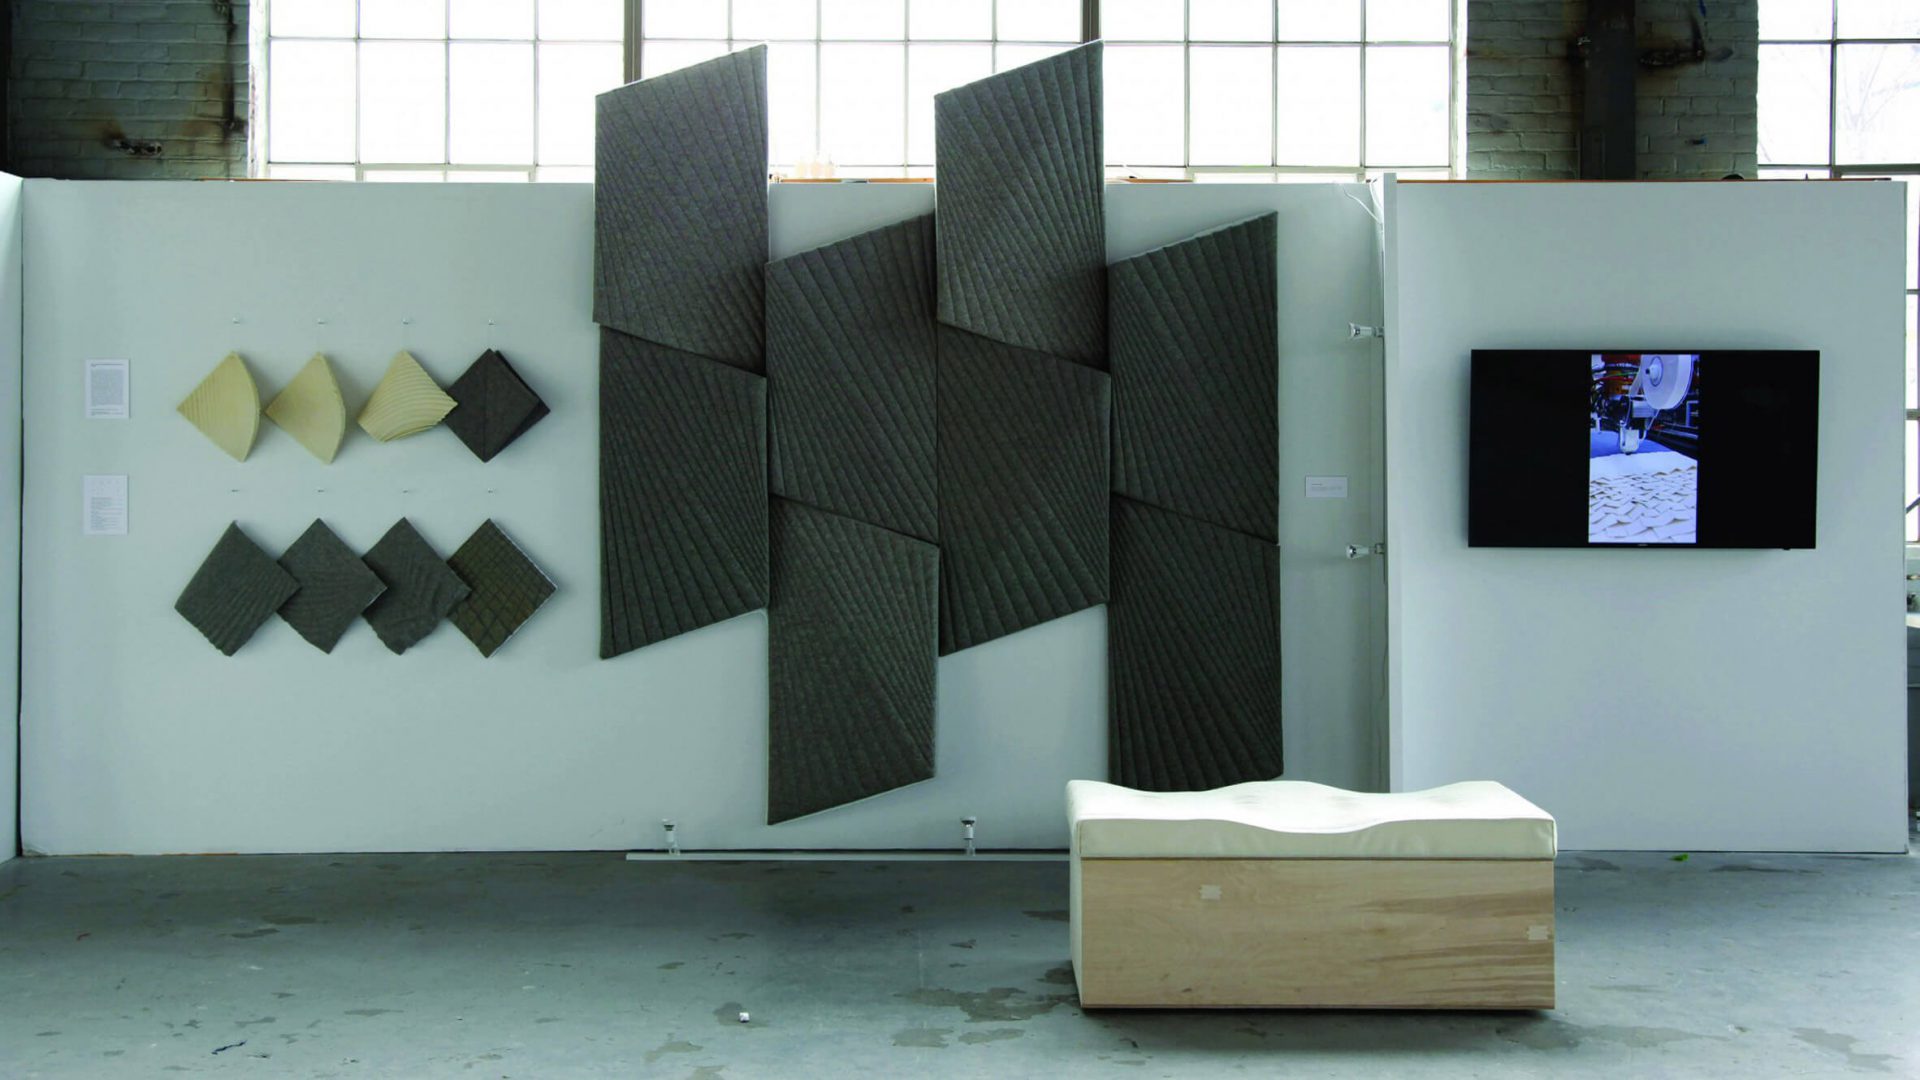 HARD+SOFT can be used to procede felt architectural and interior elements